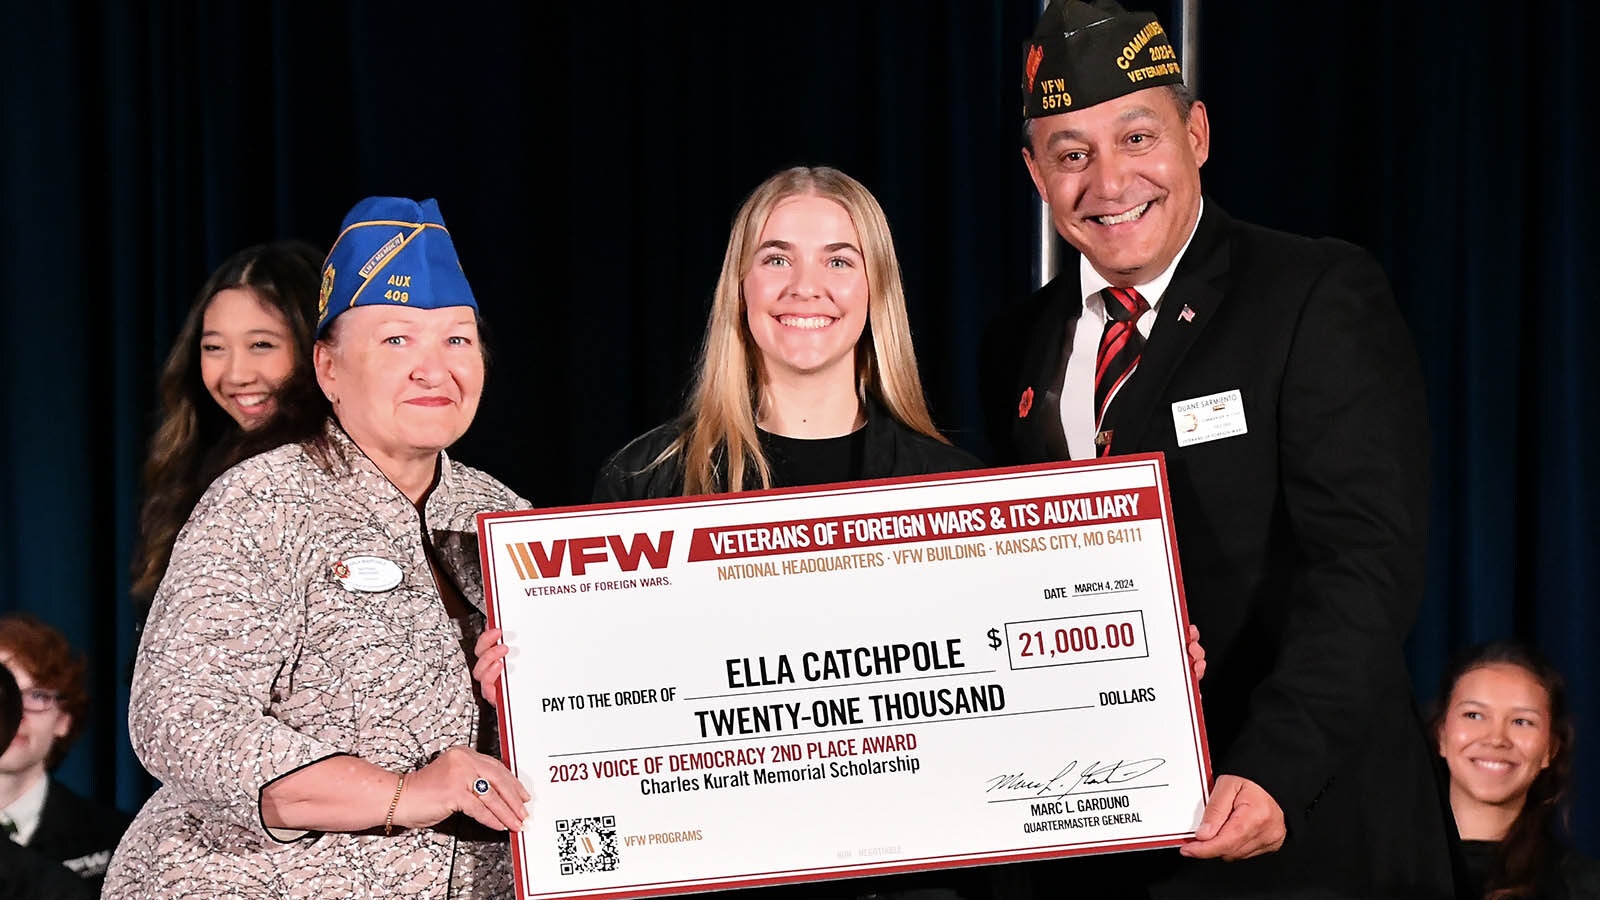 Casper high school senior Ella Catchpole recently took home a $21,000 VFW scholarship as the second-place winner nationally in the VFW's Voice of Democracy essay contest.